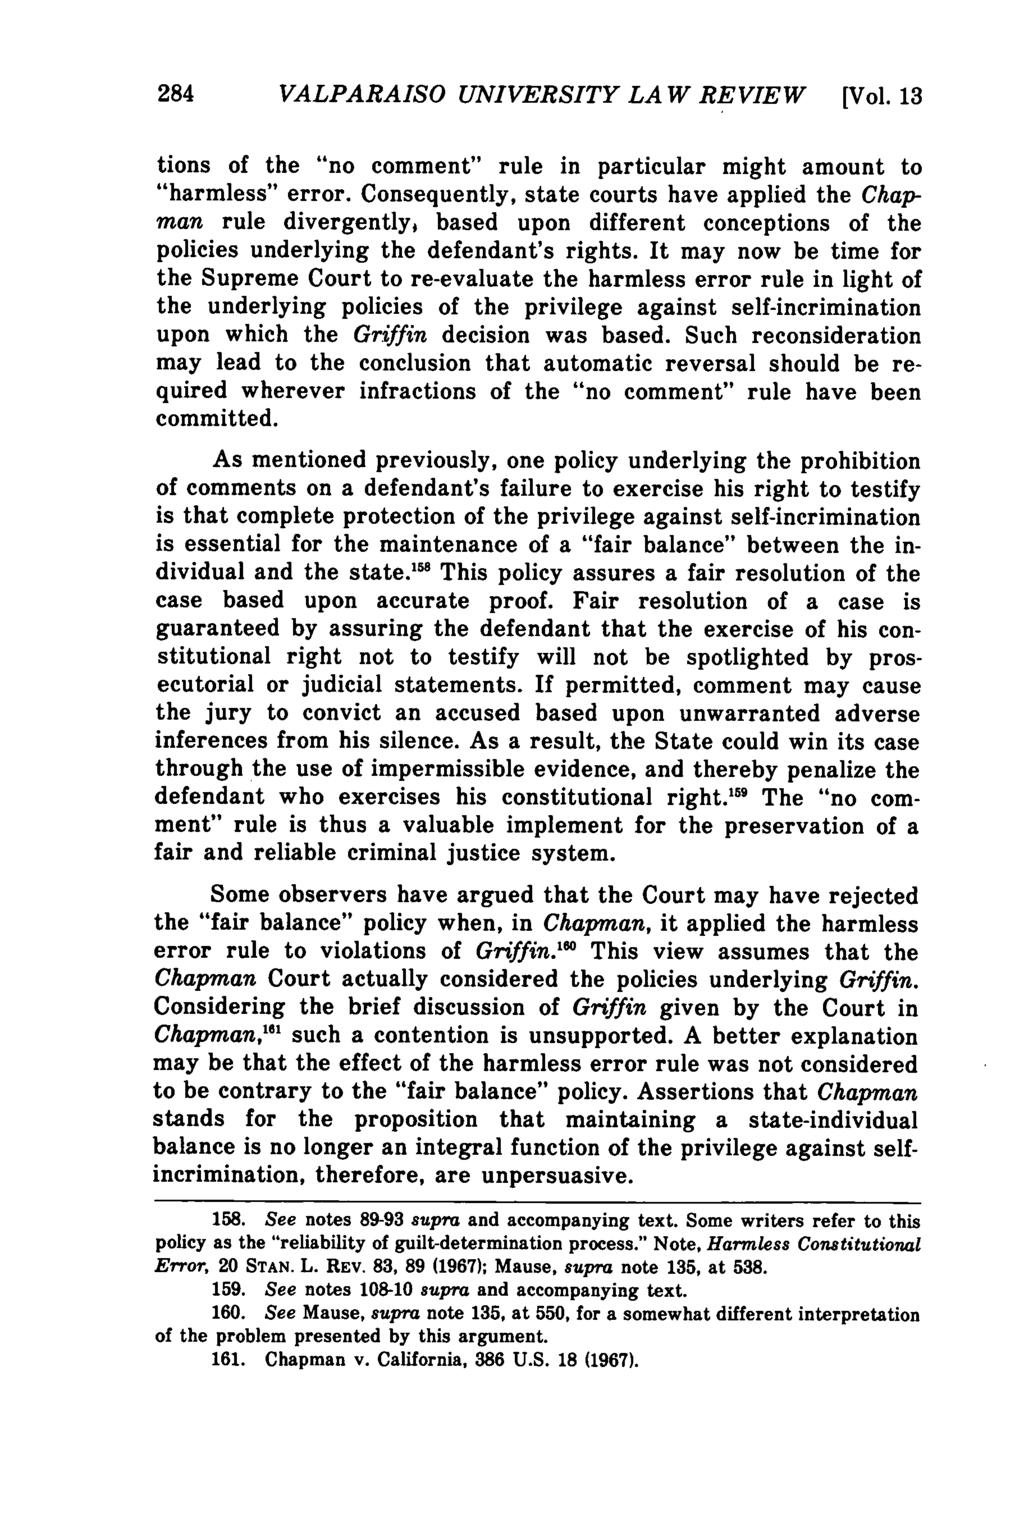 Valparaiso University Law Review, Vol. 13, No. 2 [1979], Art. 3 284 VALPARAISO UNIVERSITY LAW REVIEW [Vol. 13 tions of the "no comment" rule in particular might amount to "harmless" error.